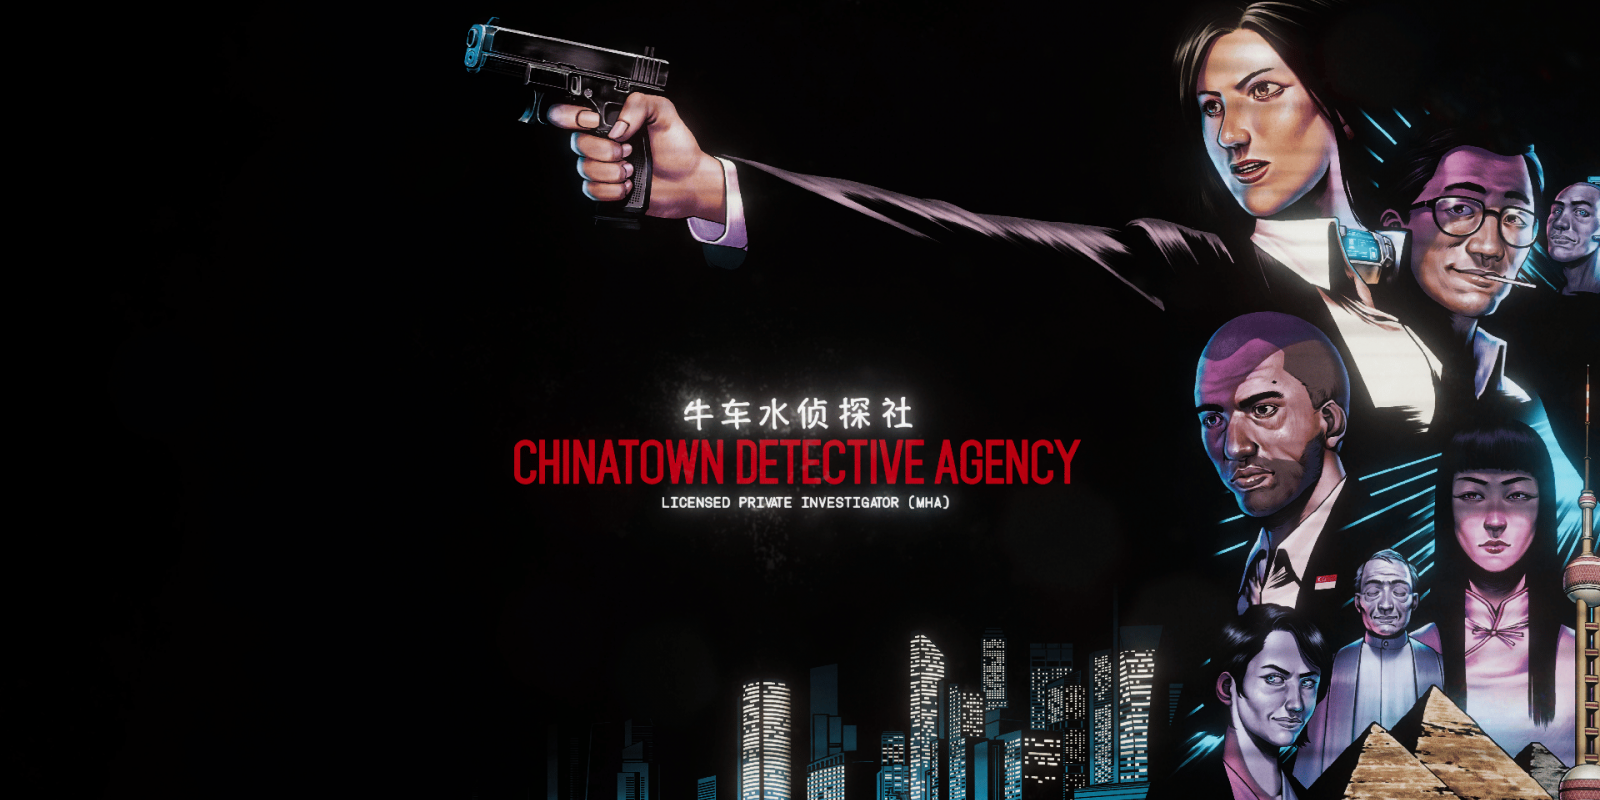 The title screen to chinatown detective agency. A woman in a suit is pointing a gun superimposed against a background of a neon skyline, with other hard-boiled characters around her.